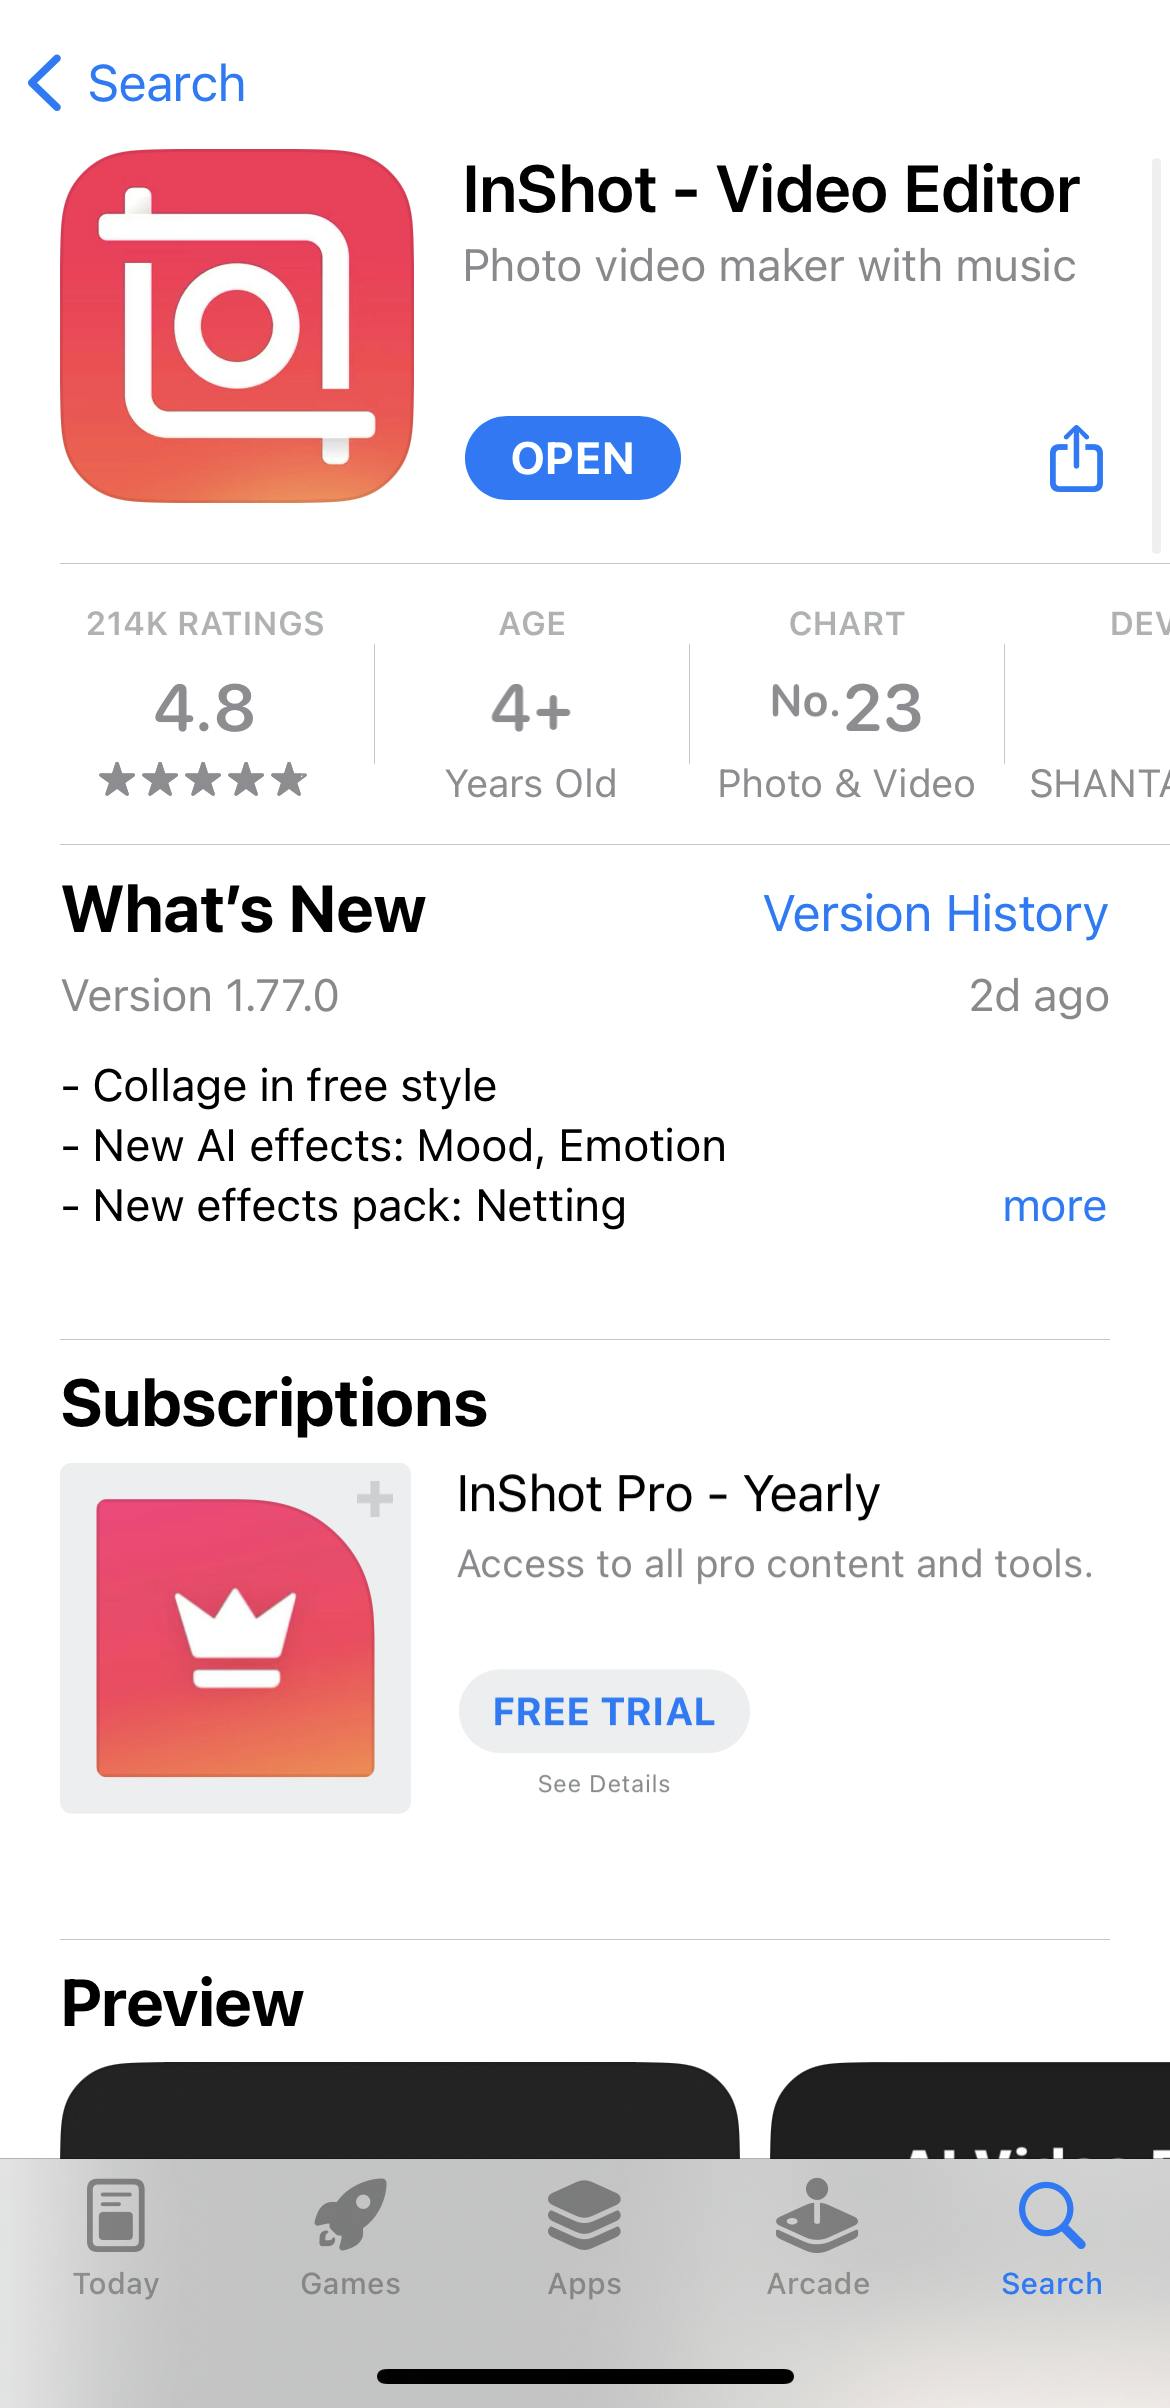 InShot video editor for Instagram stories and reels